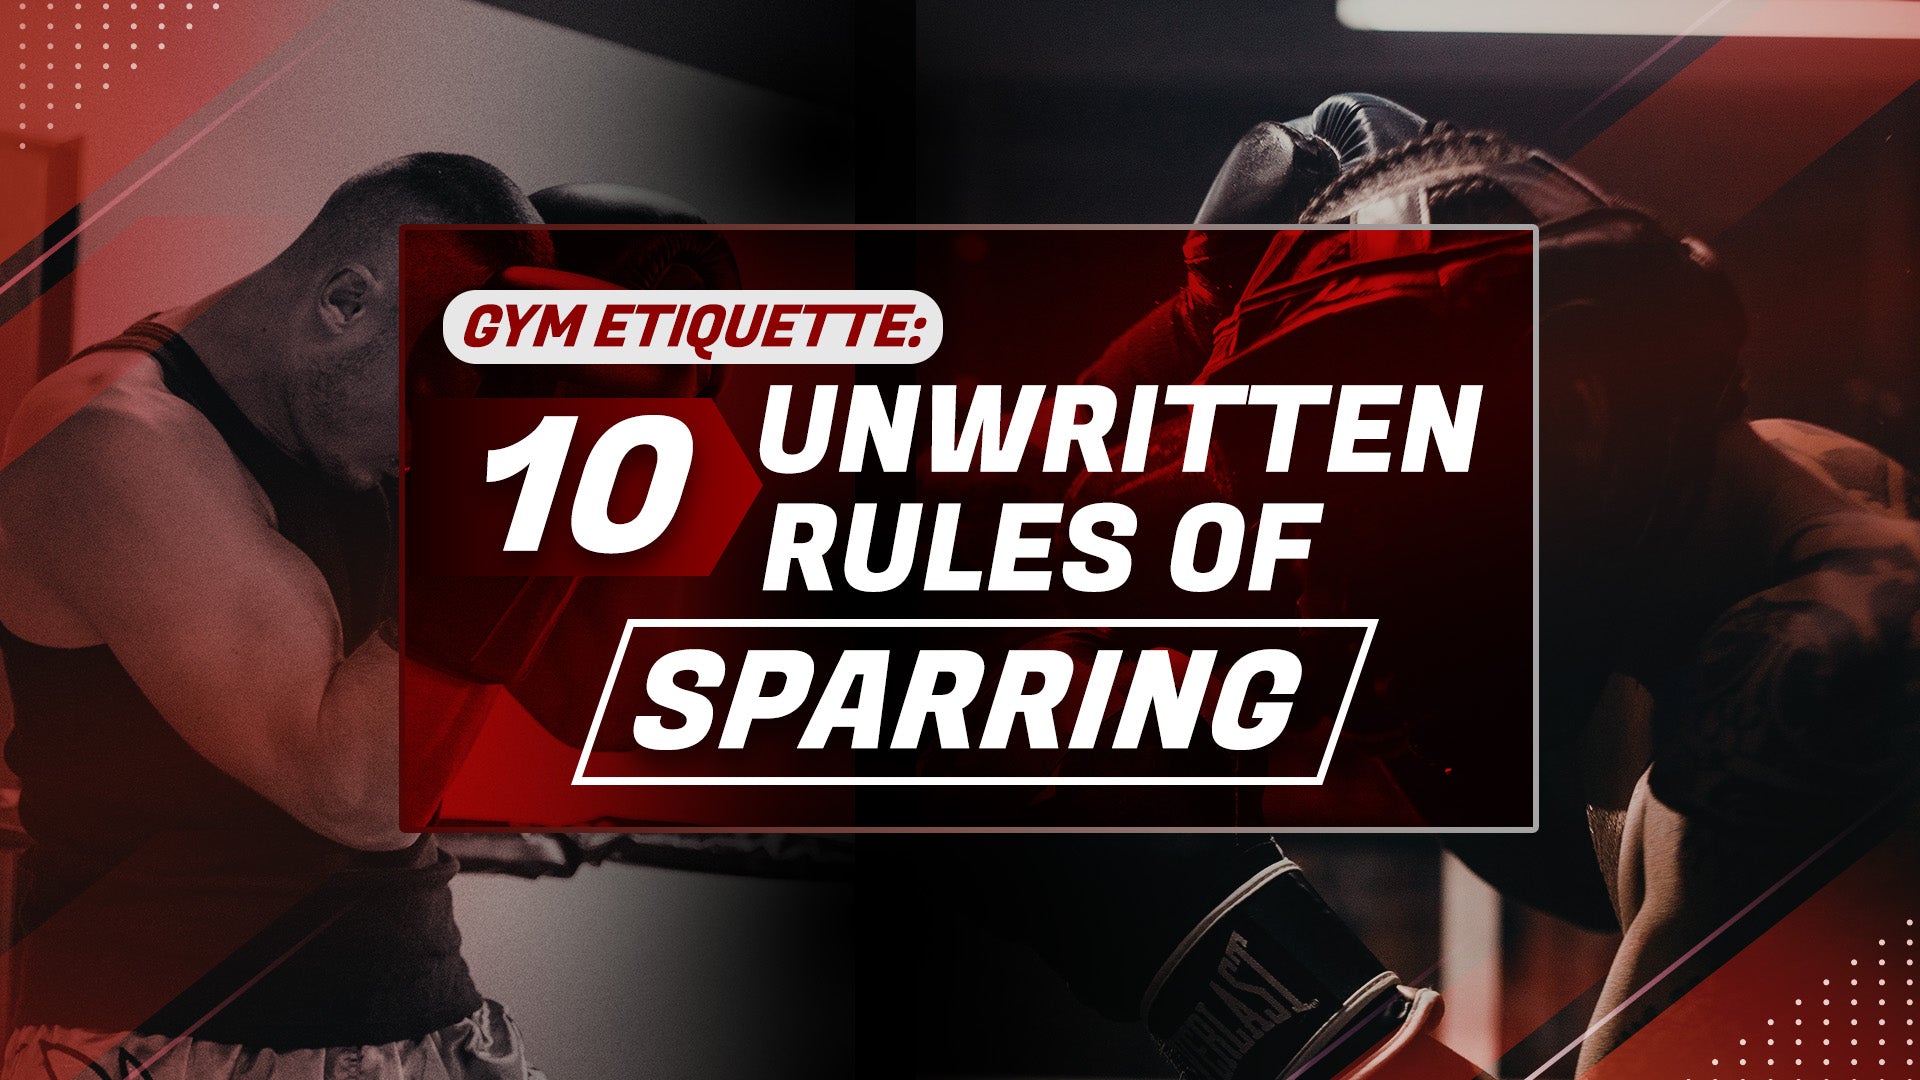 Gym Etiquette: 10 Unwritten Rules of Sparring